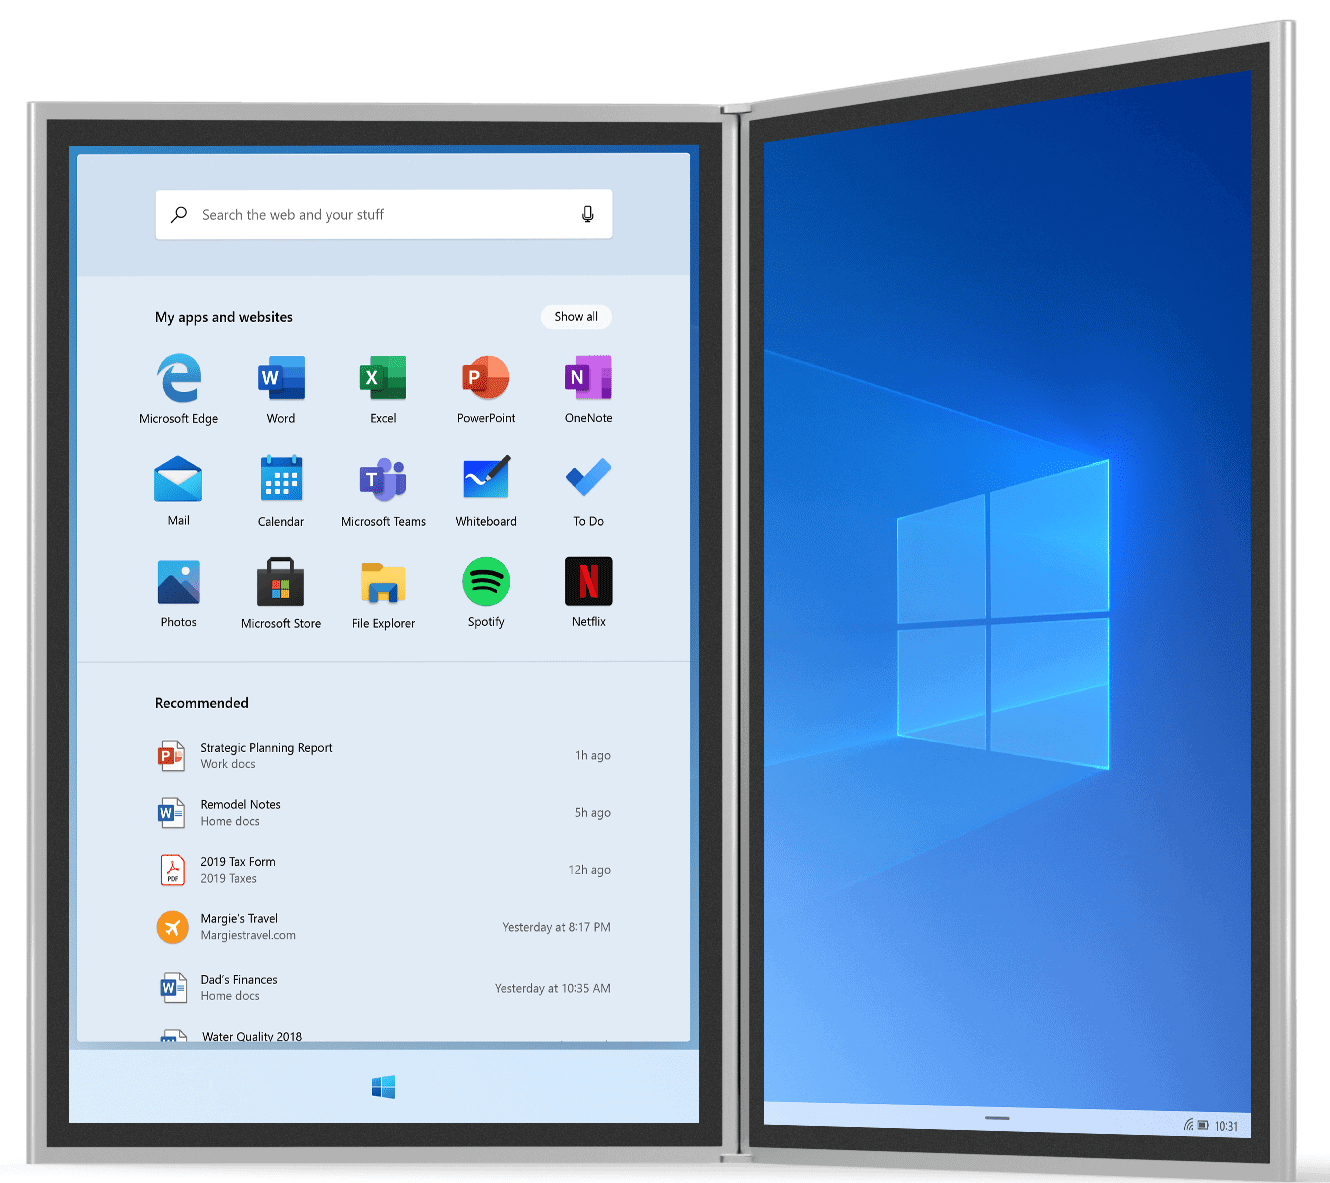 Windows 10X may not support Win32 programs through virtualization